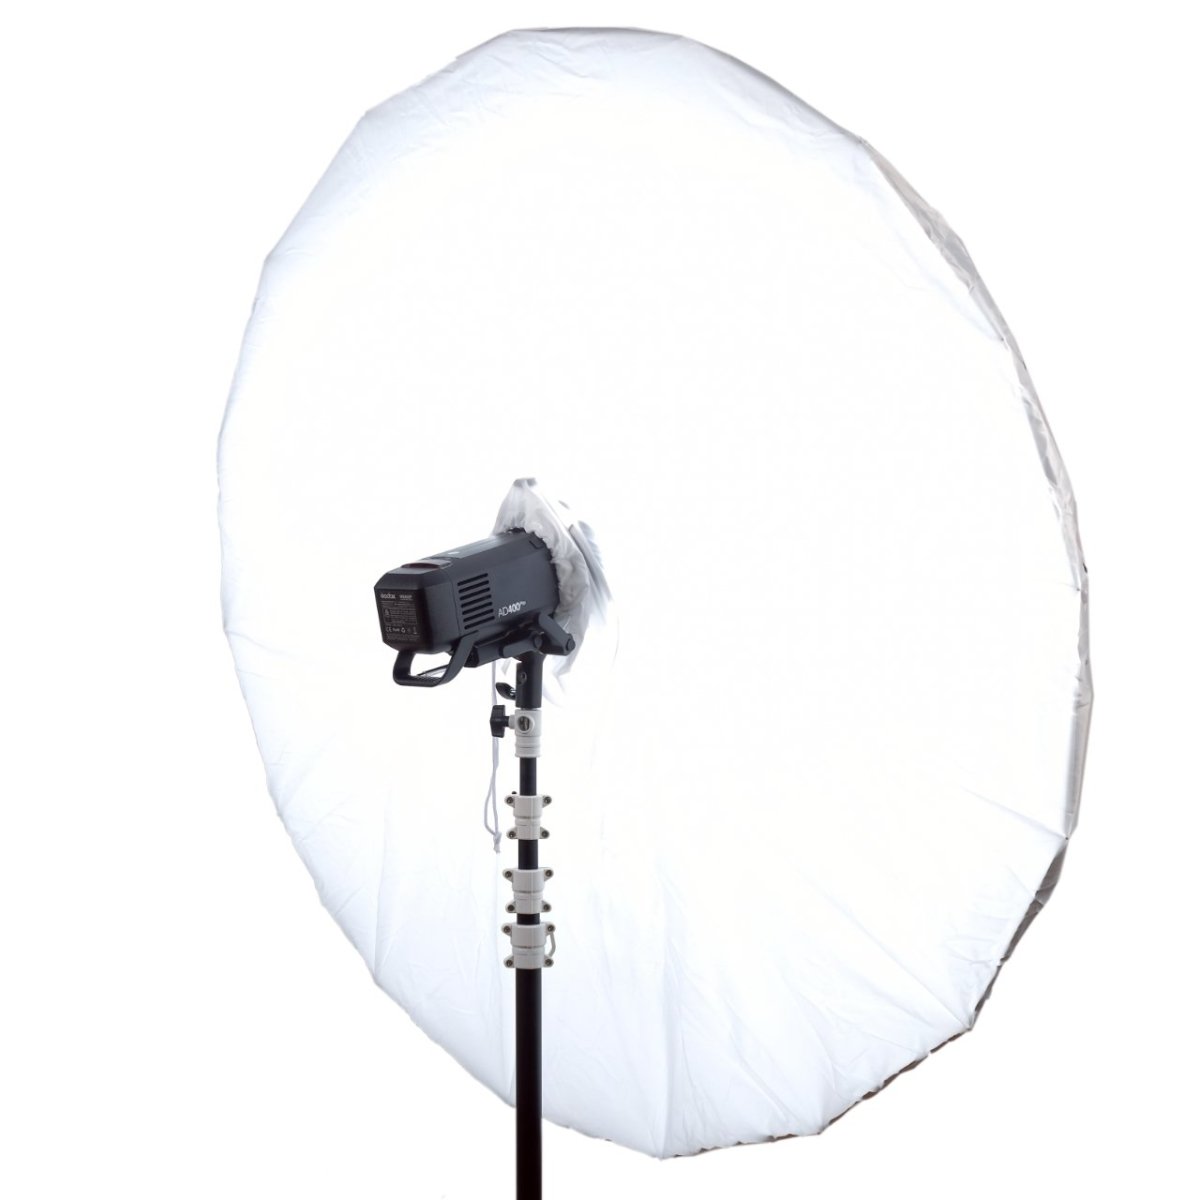 Godox AD400Pro New Package Deal 1 - Arahan Photo